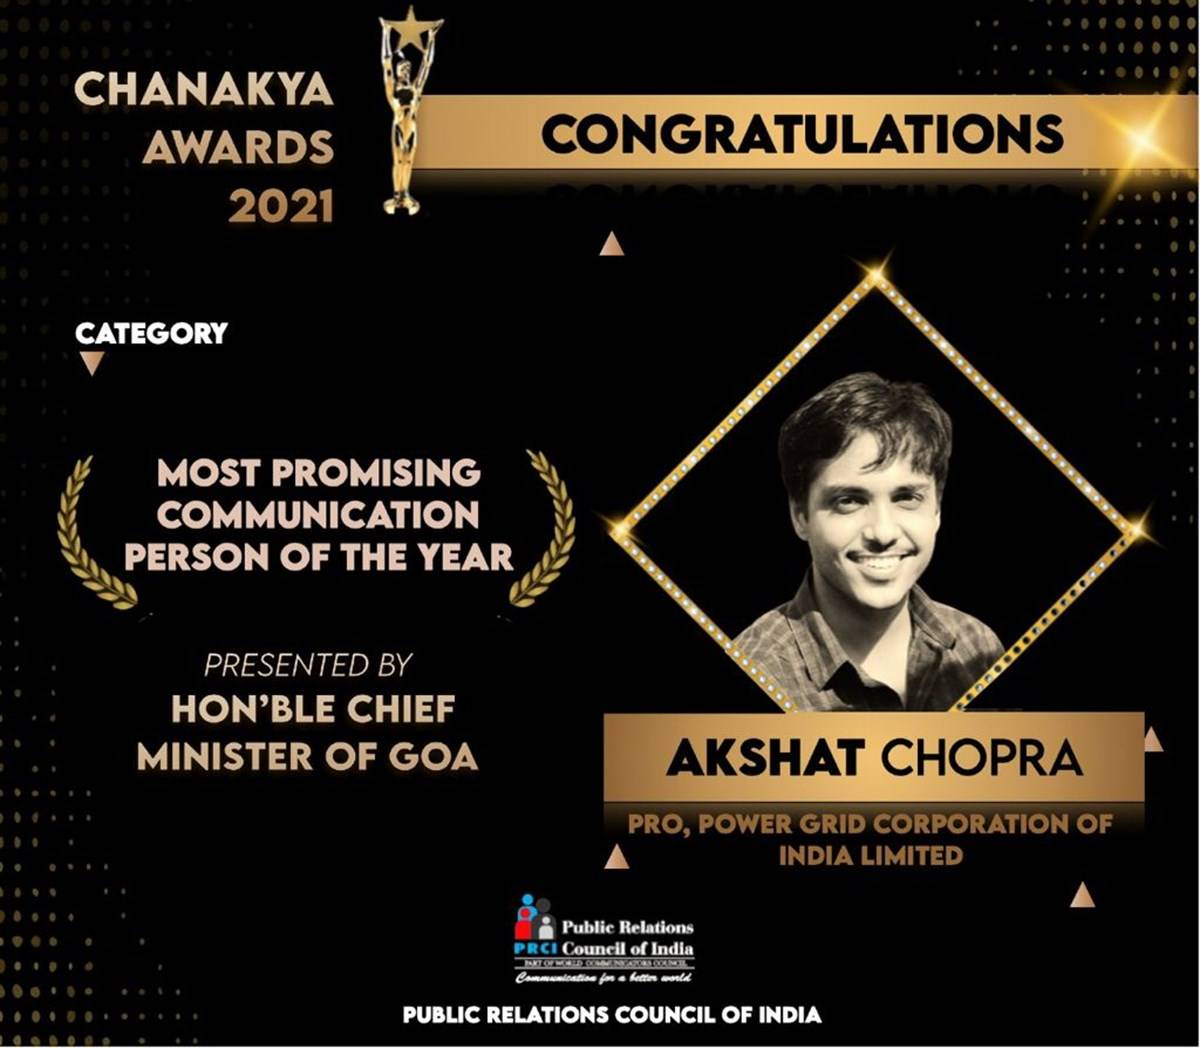 Akshat Chopra from POWERGRID Wins Most Promising Communication Person of the Year Award